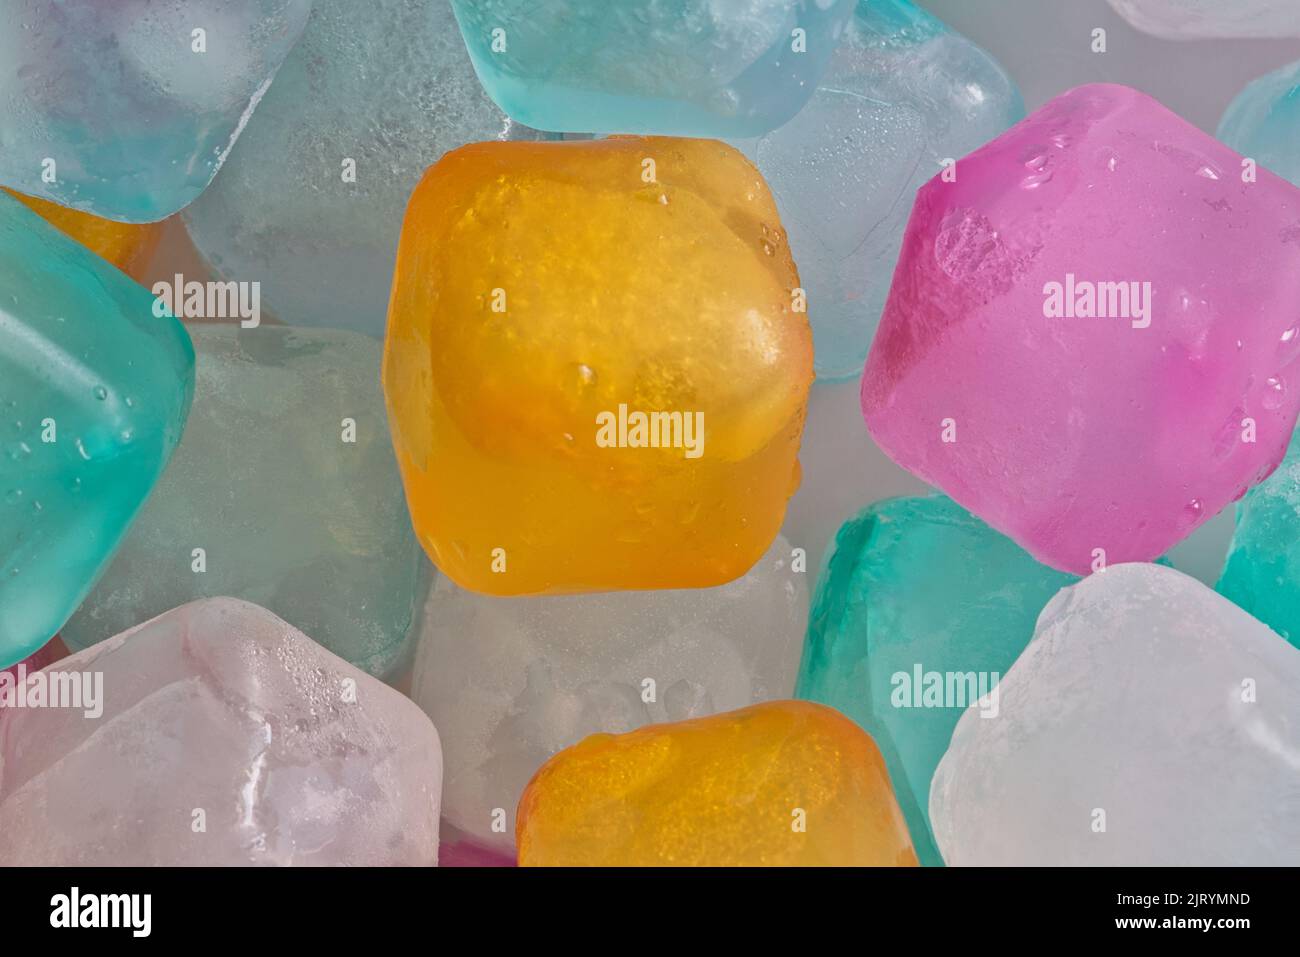 Colorful plastic ice cube blocks, closeup abstract background. Cold refreshing drink concept. Stock Photo